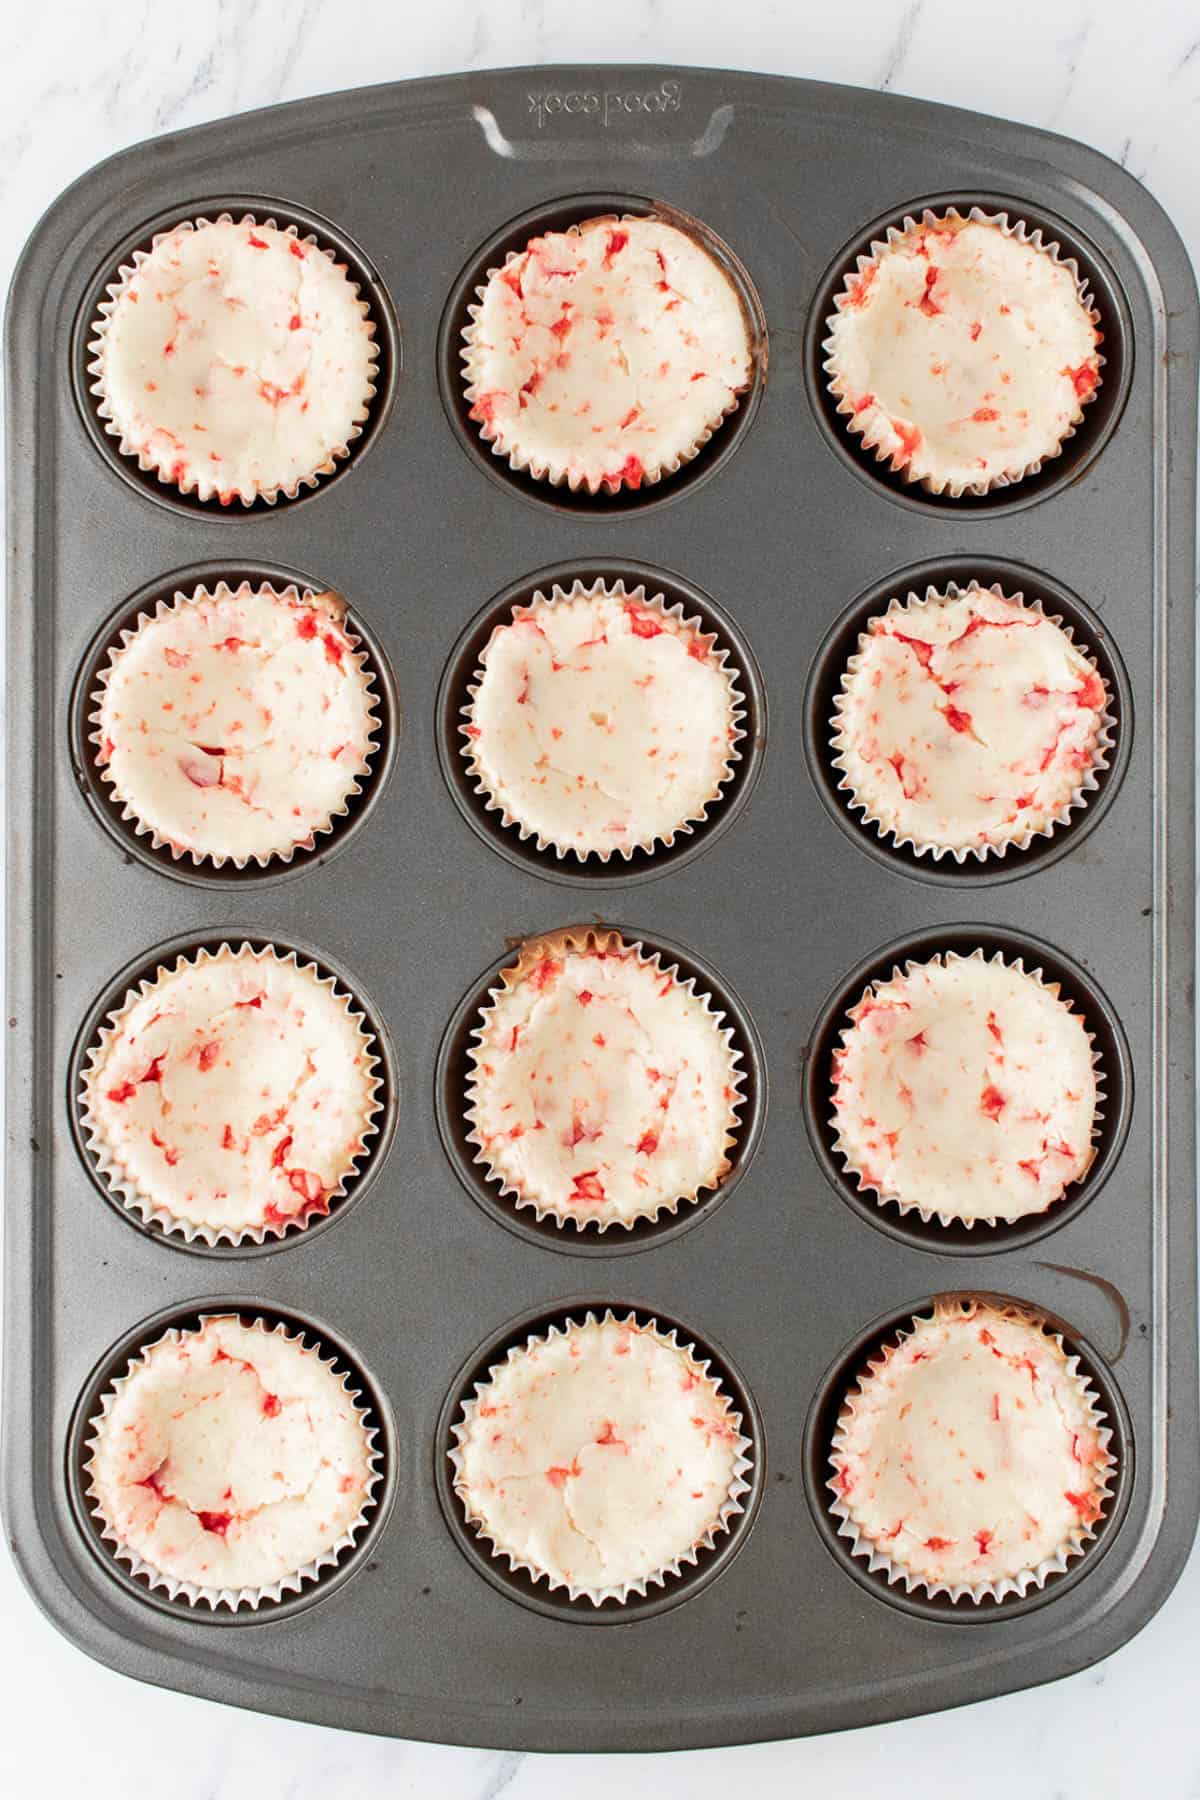 Baked mini white chocolate peppermint cheesecakes in a muffin pan.